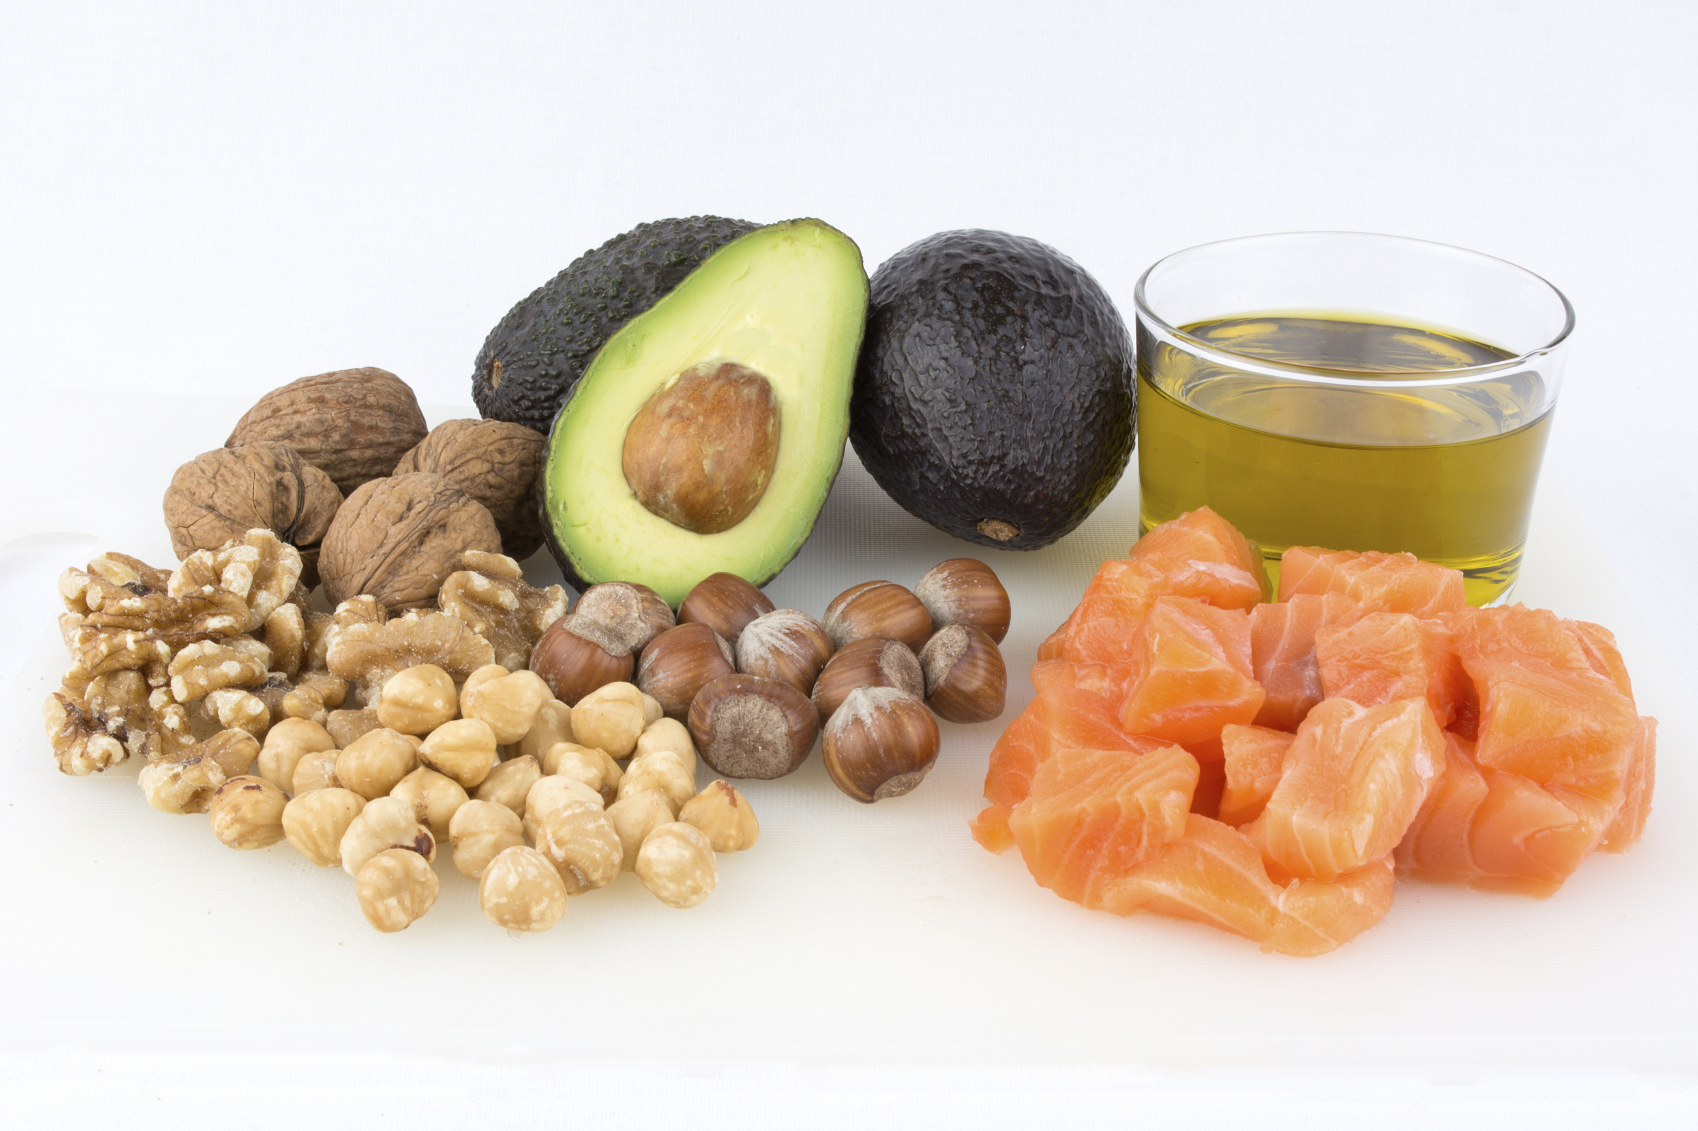 Fats: Saturated or Unsaturated? | Wellness Balance